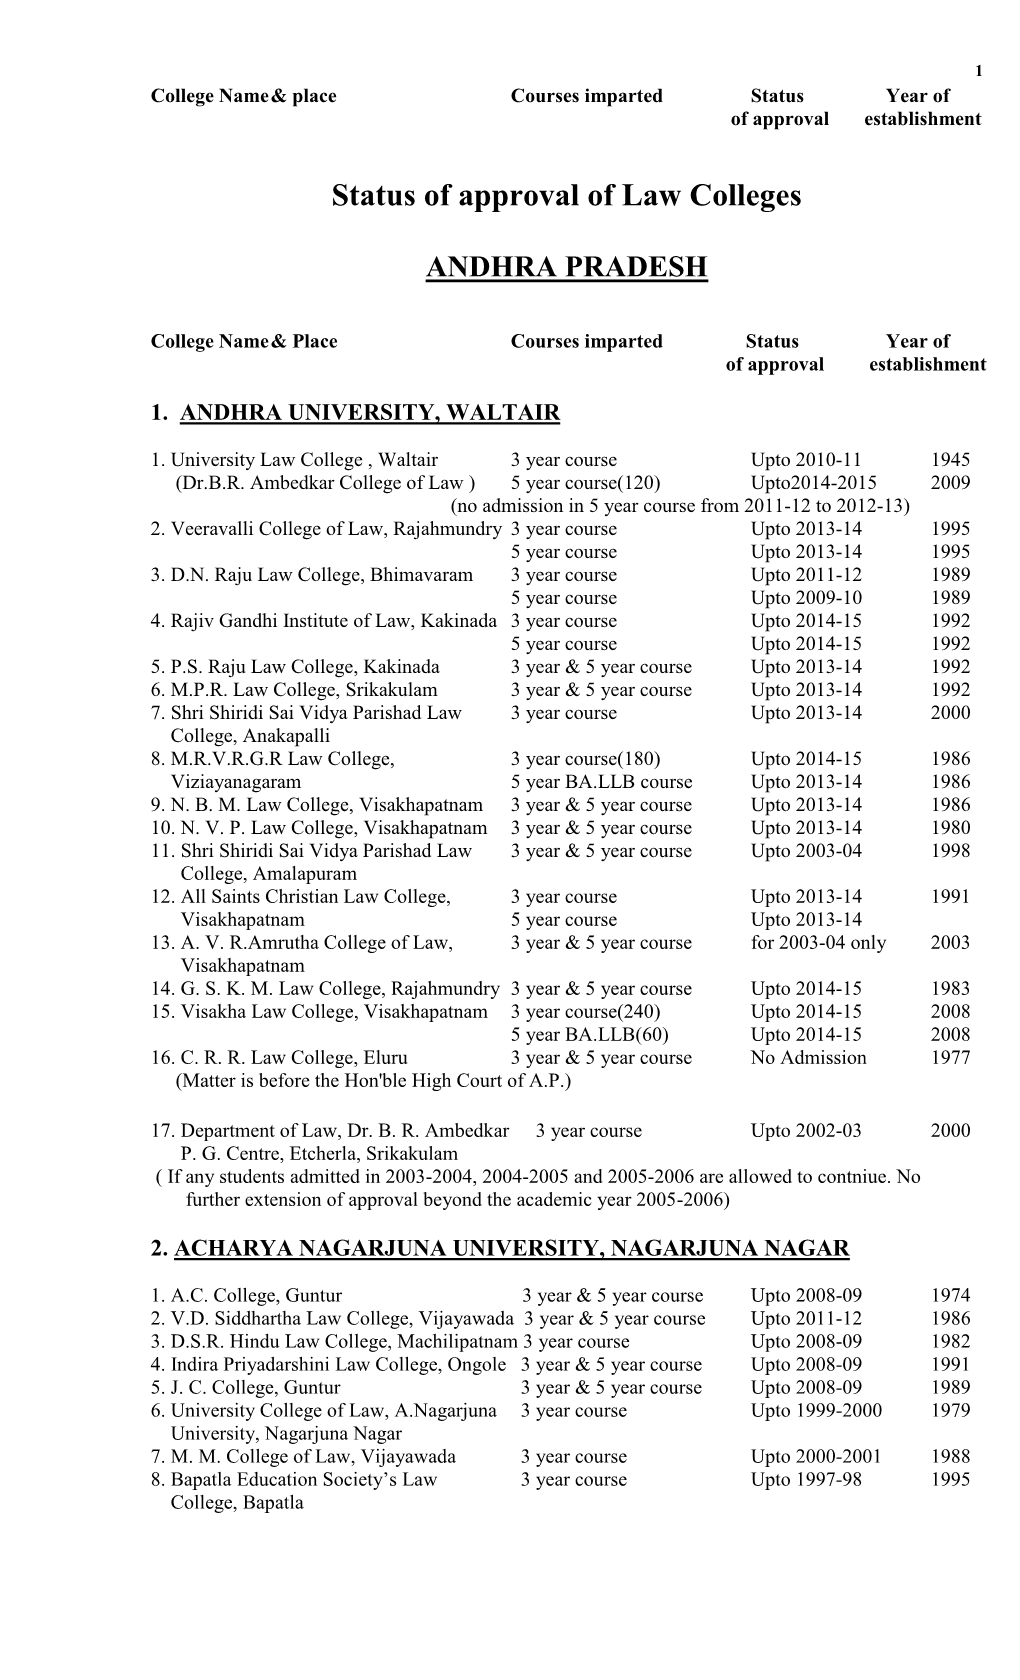 List of Law Colleges Having Deemed / Permanent / Temporary Approval of Affiliation of the Bar Council of India As on 31St Marc